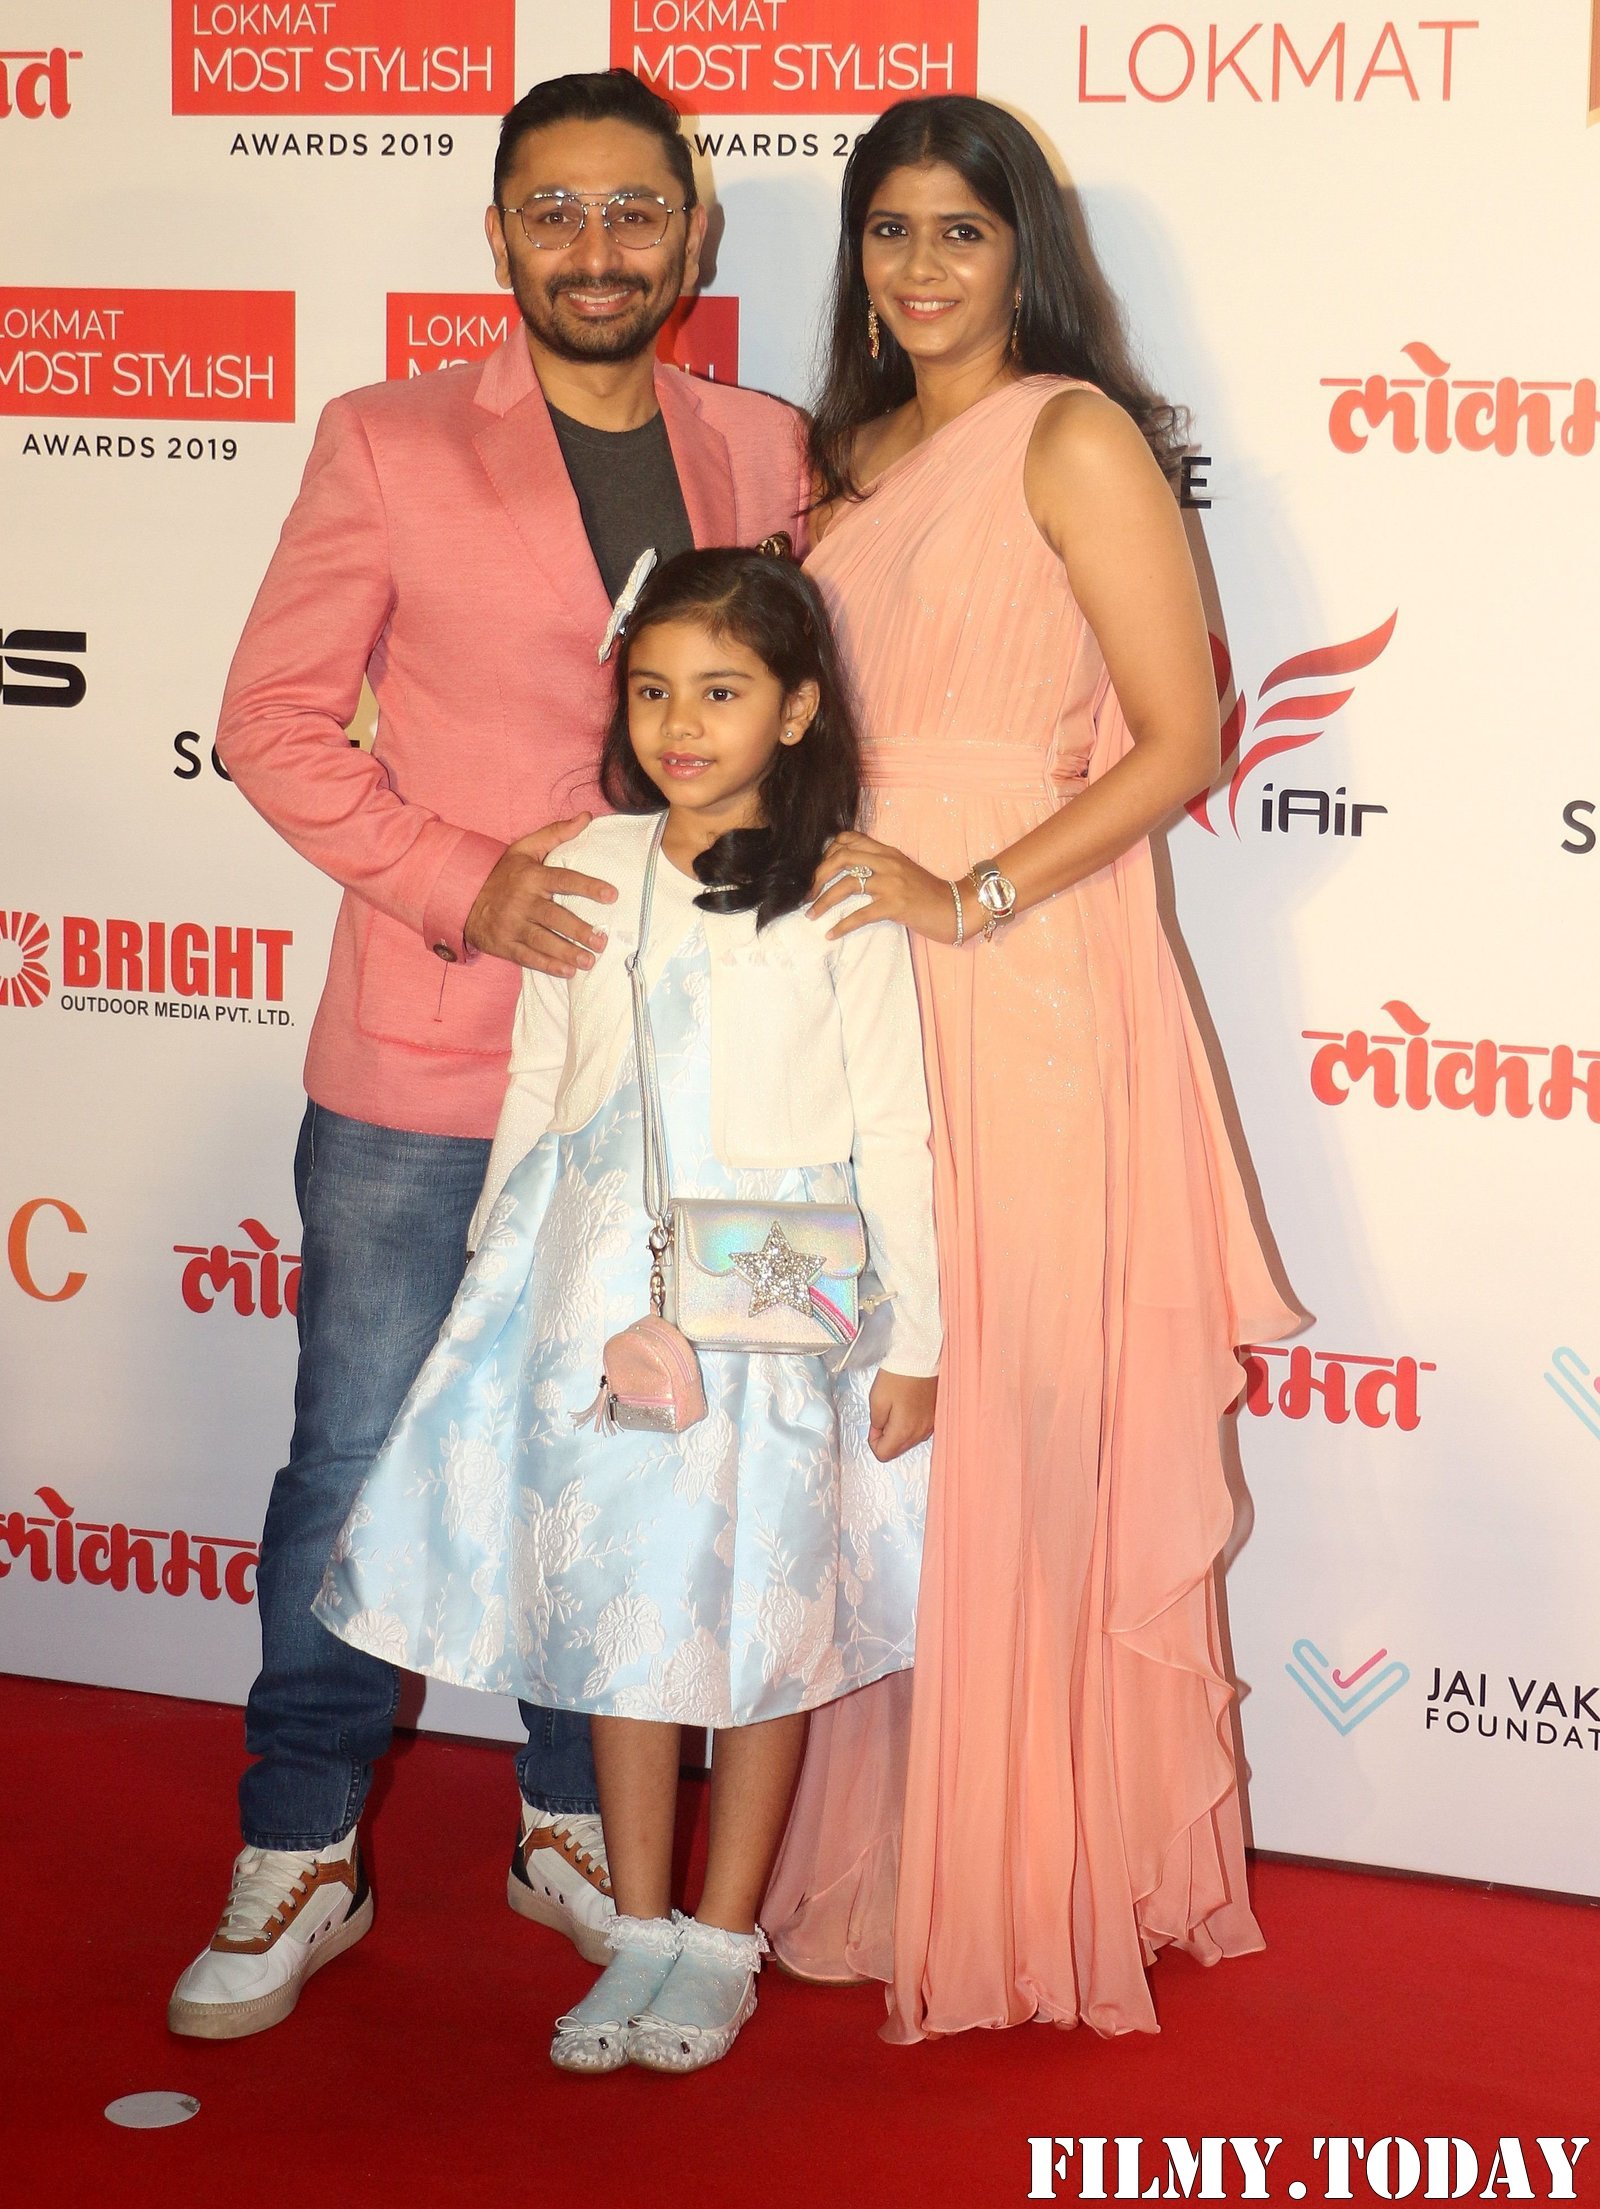 Photos: Lokmat Most Stylish Awards 2019 At The Leela Hotel | Picture 1709586